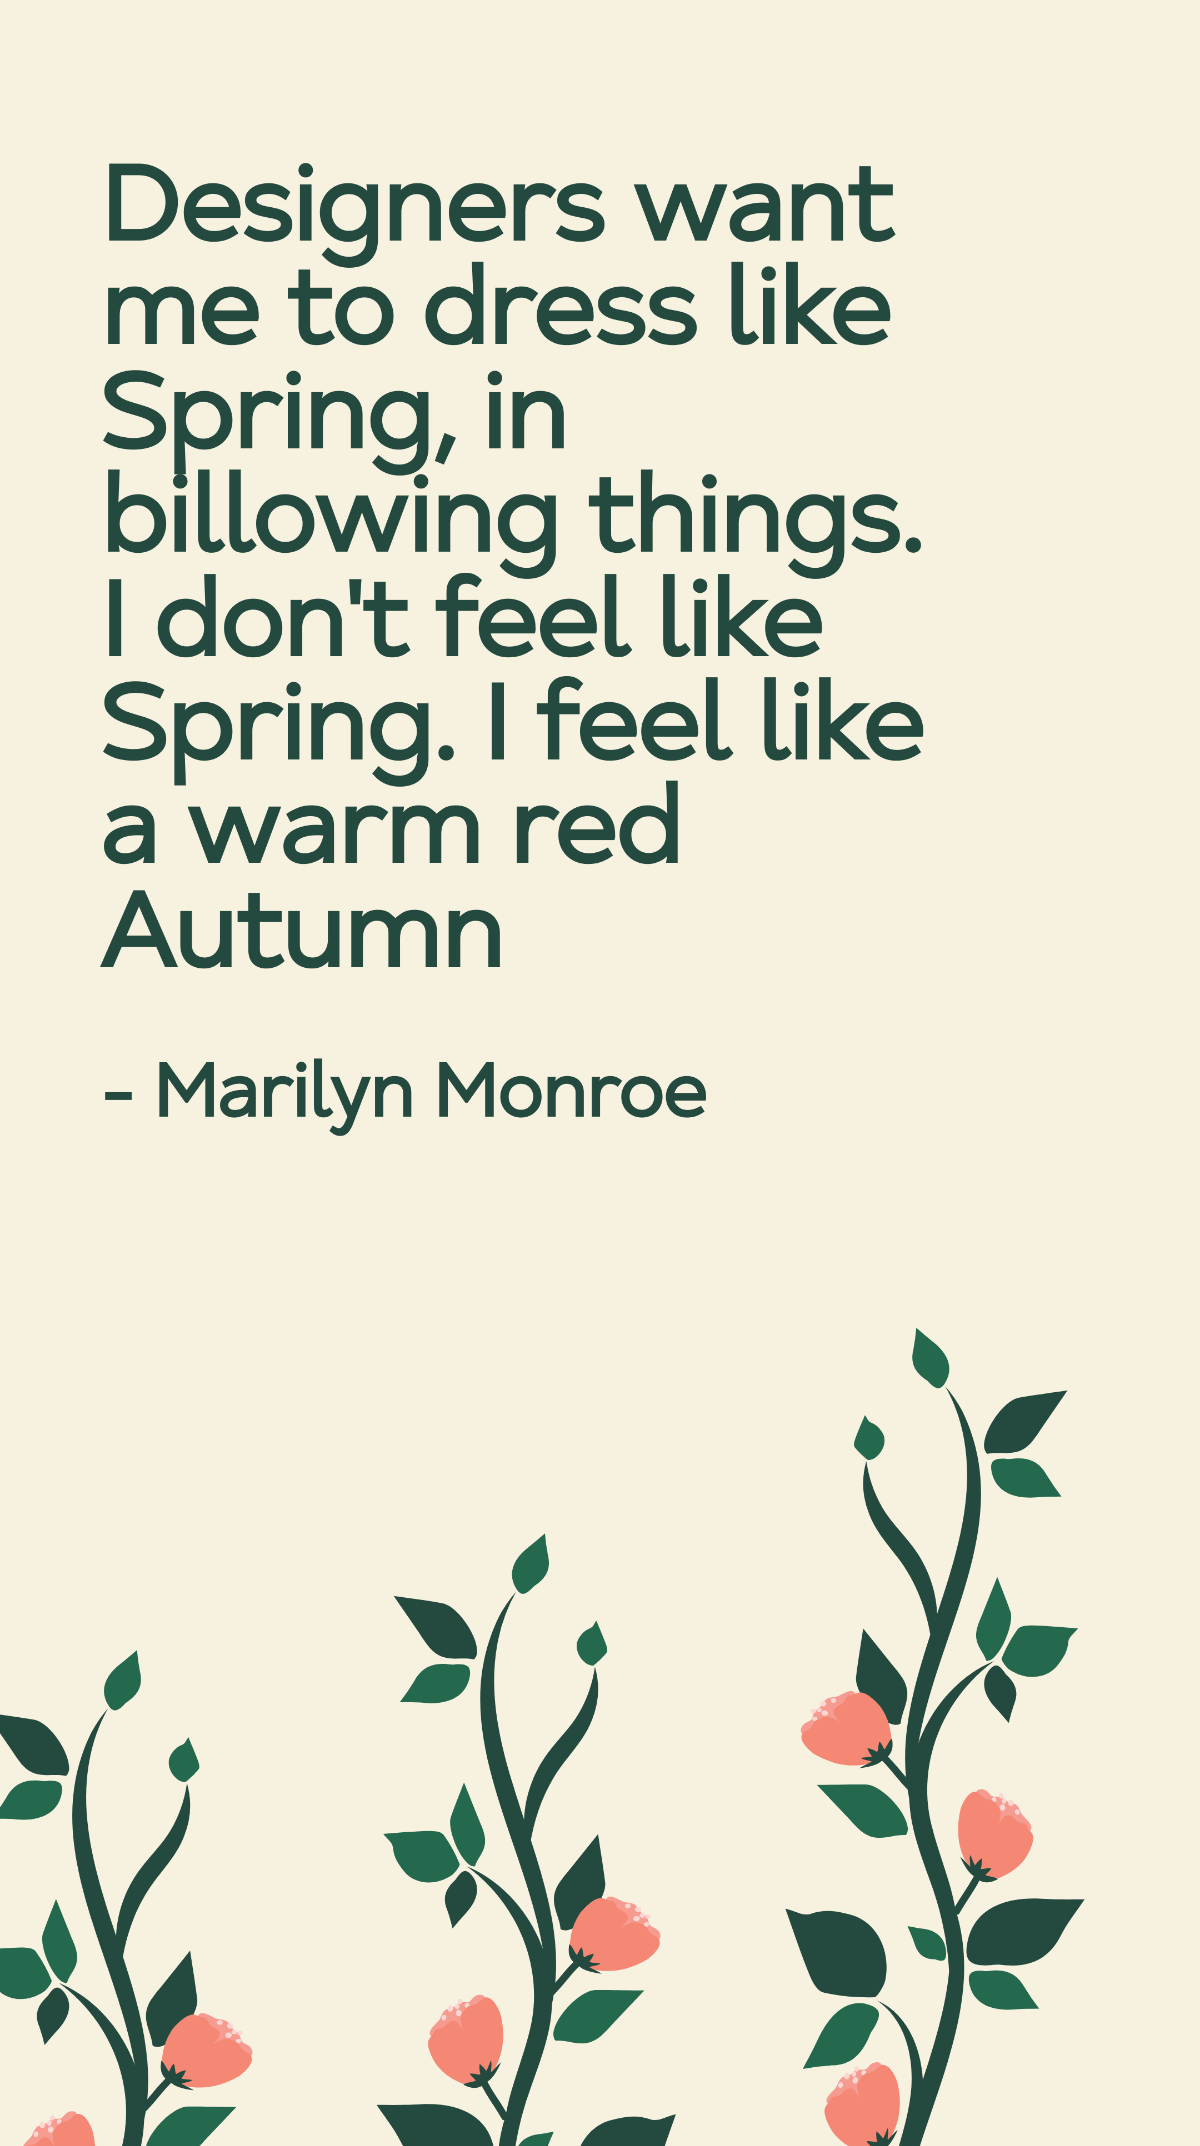 Marilyn Monroe - Designers want me to dress like Spring, in billowing things. I don't feel like Spring. I feel like a warm red Autumn Template